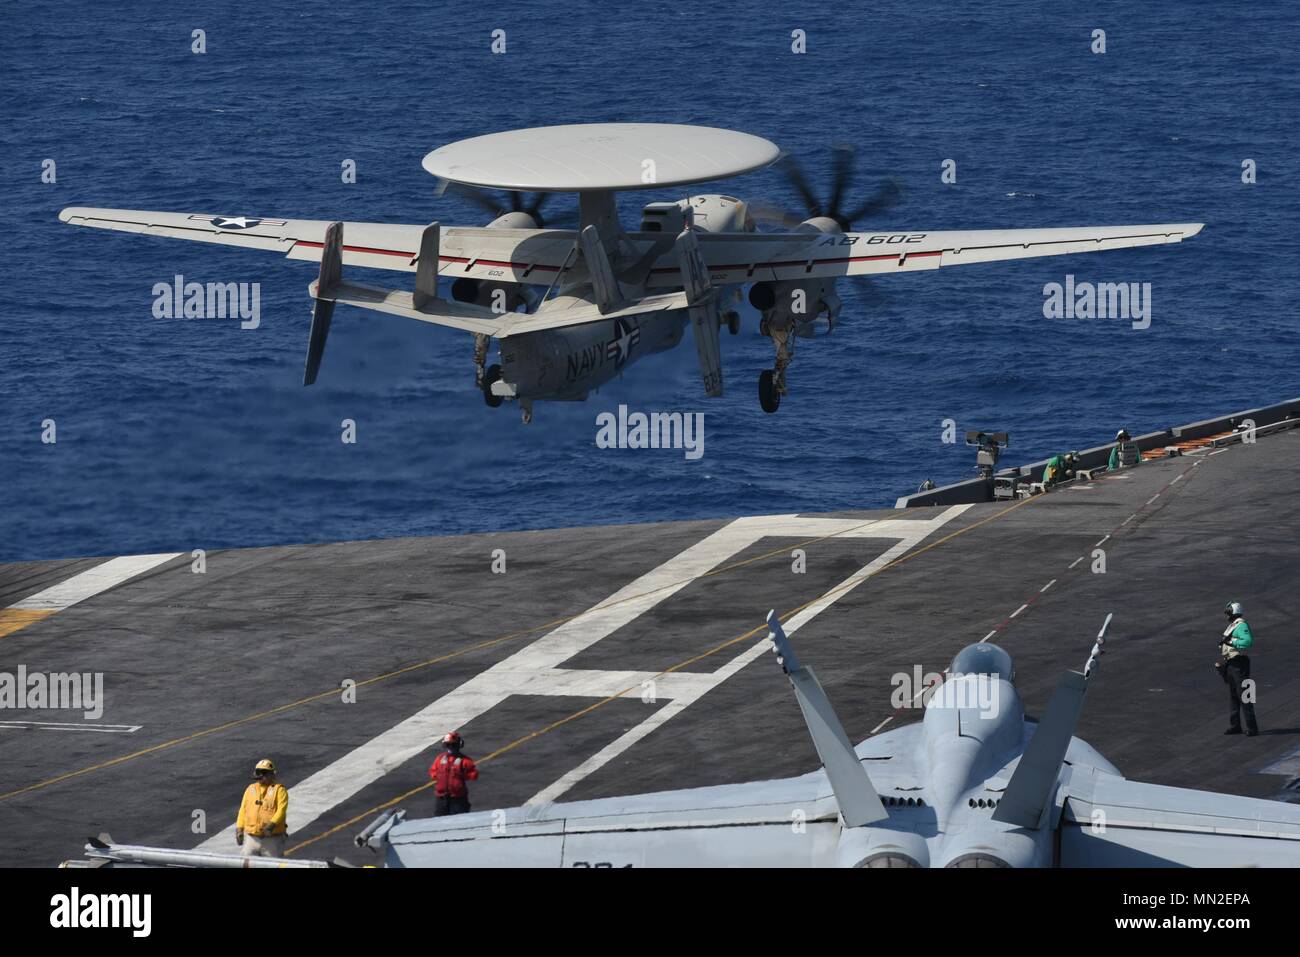 180509-N-ZH683-0210 MEDITERRANEAN SEA (May 9, 2018) An E-2D Hawkeye, assigned to the 'Seahawks' of Carrier Airborne Early Warning Squadron (VAW) 126, launches from the flight deck aboard USS Harry S. Truman (CVN 75), May 9, 2018. As the Carrier Strike Group 8 flag ship, Truman's support of Operation Inherent Resolve demonstrates the capability and flexibility of U.S. Naval Forces, and its resolve to eliminate the terrorist group ISIS and the threat it poses. (U.S. Navy photo by Mass Communication Specialist 3rd Class Juan Sotolongo/Released). () Stock Photo